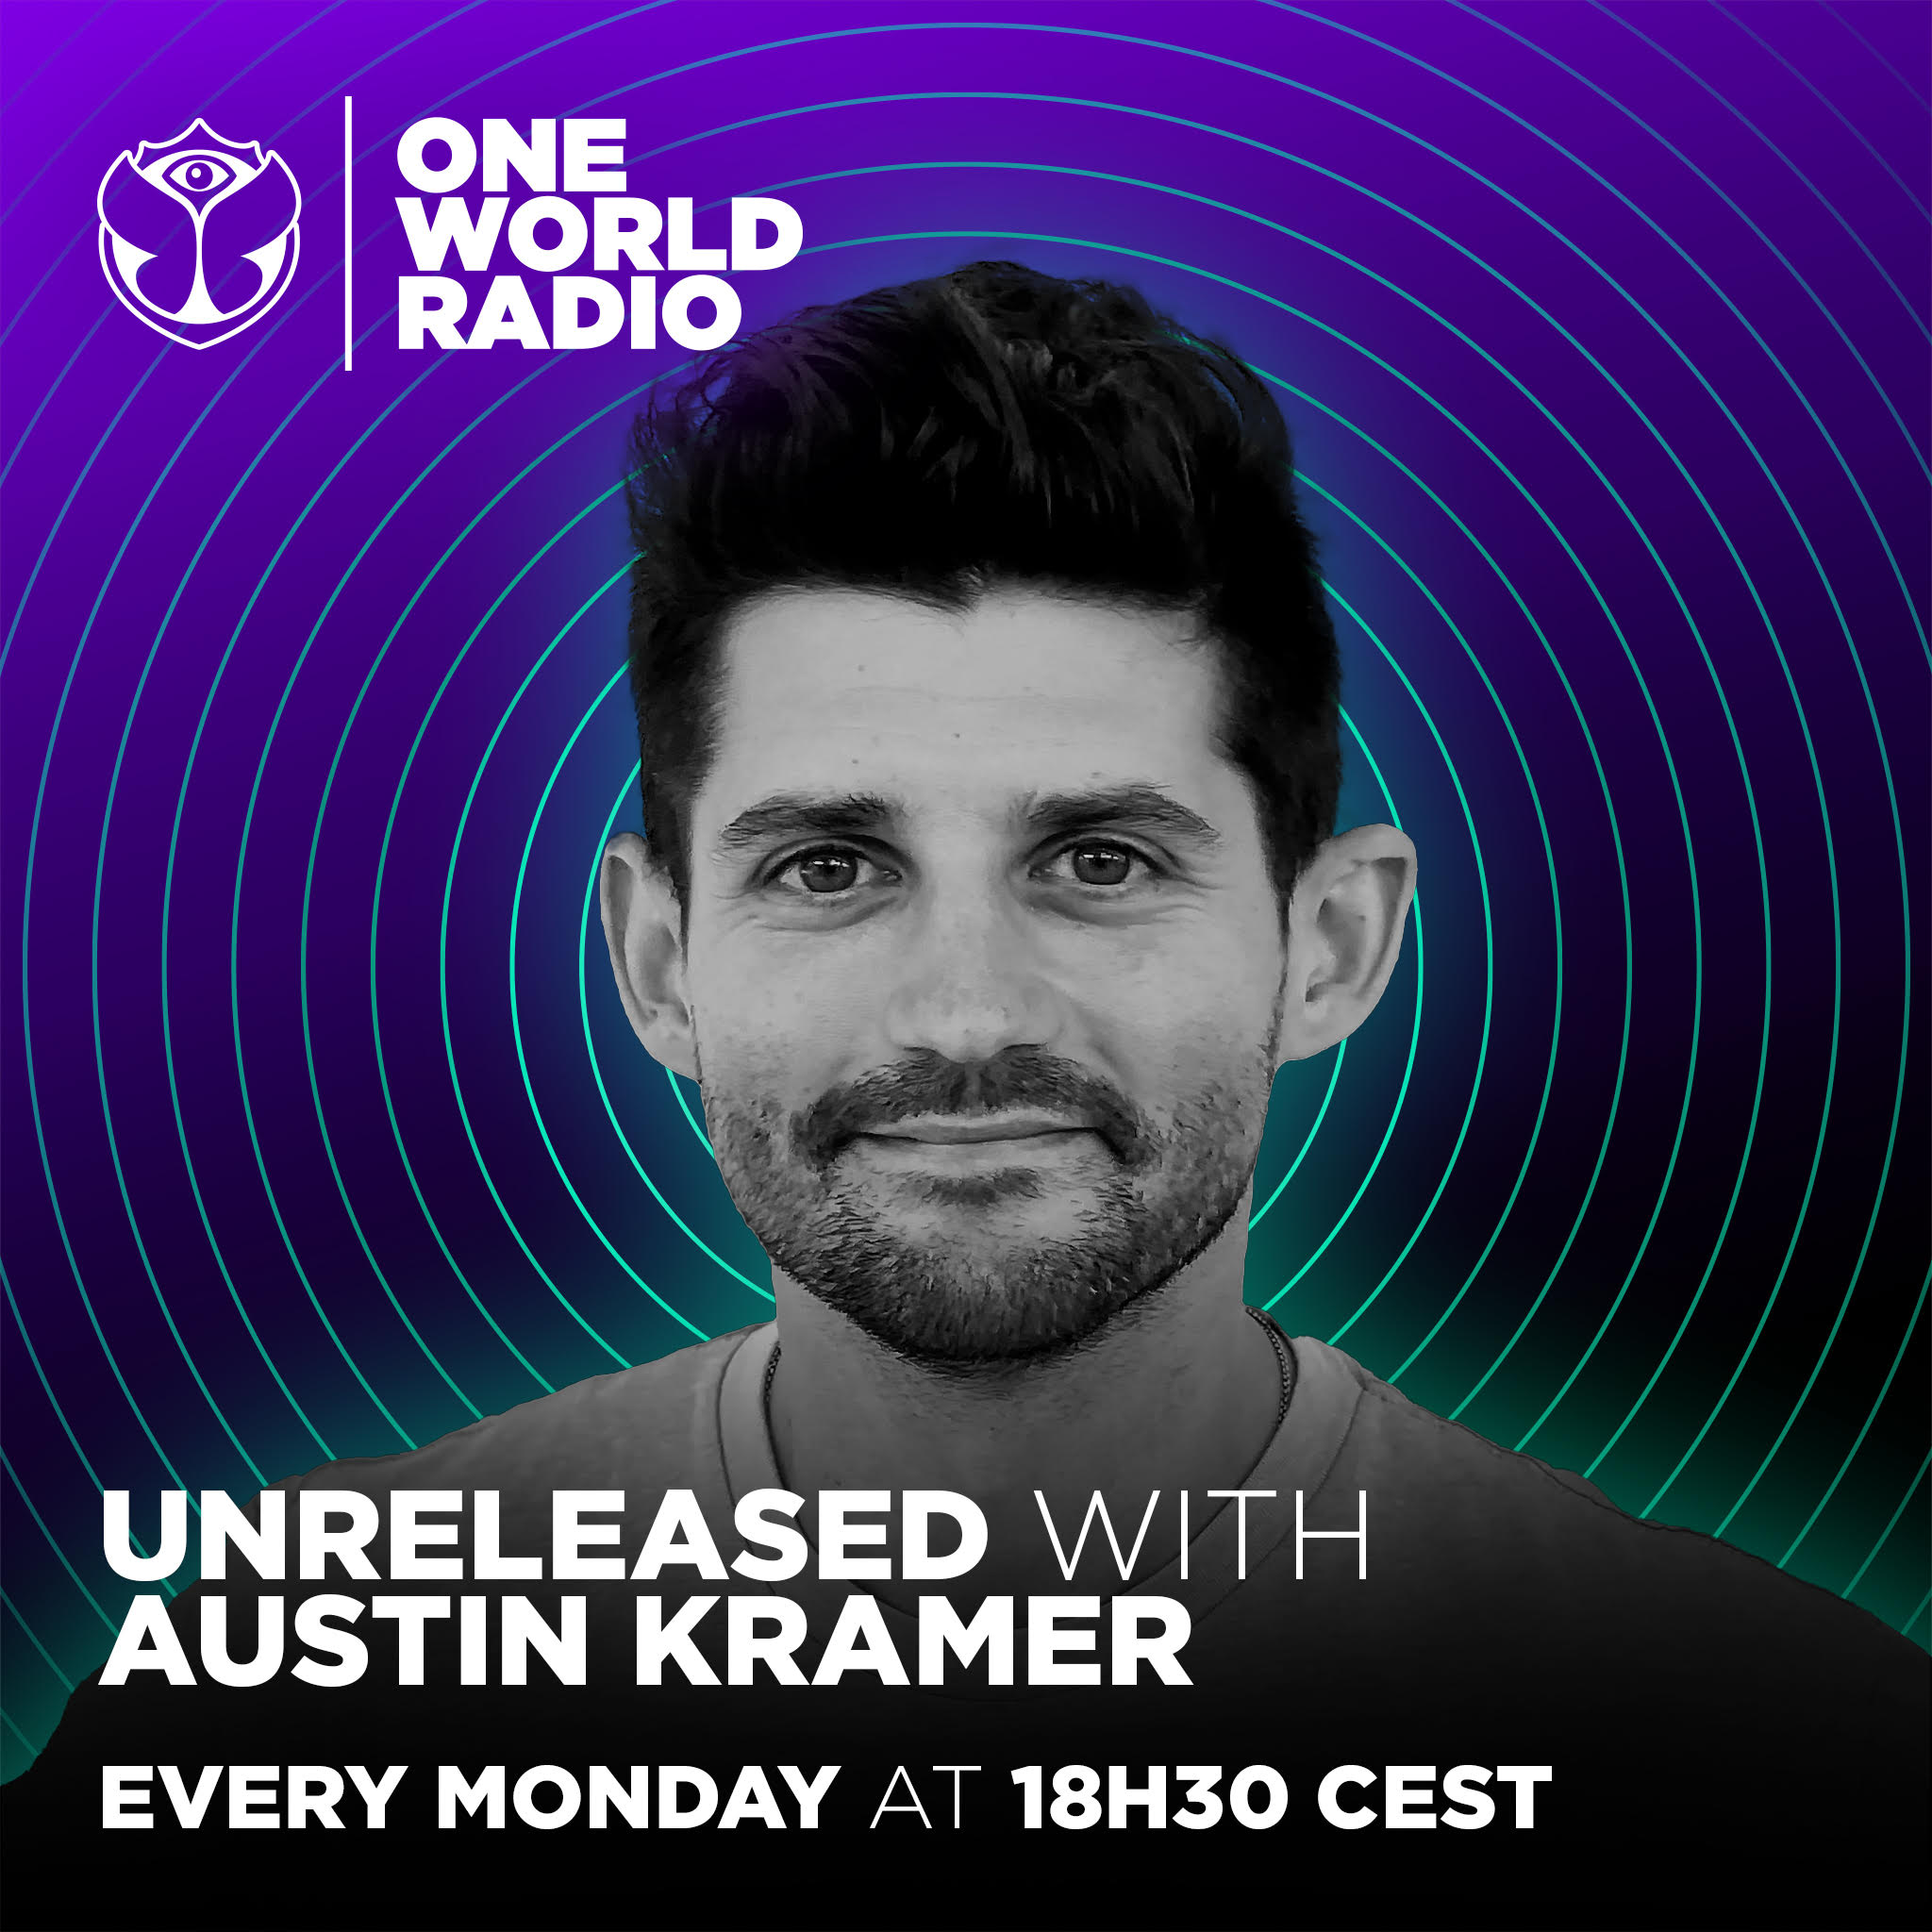 Spotify’s Former Head of Dance & Electronic Music Austin Kramer Launches Weekly Show On Tomorrowland’s ‘One World Radio’